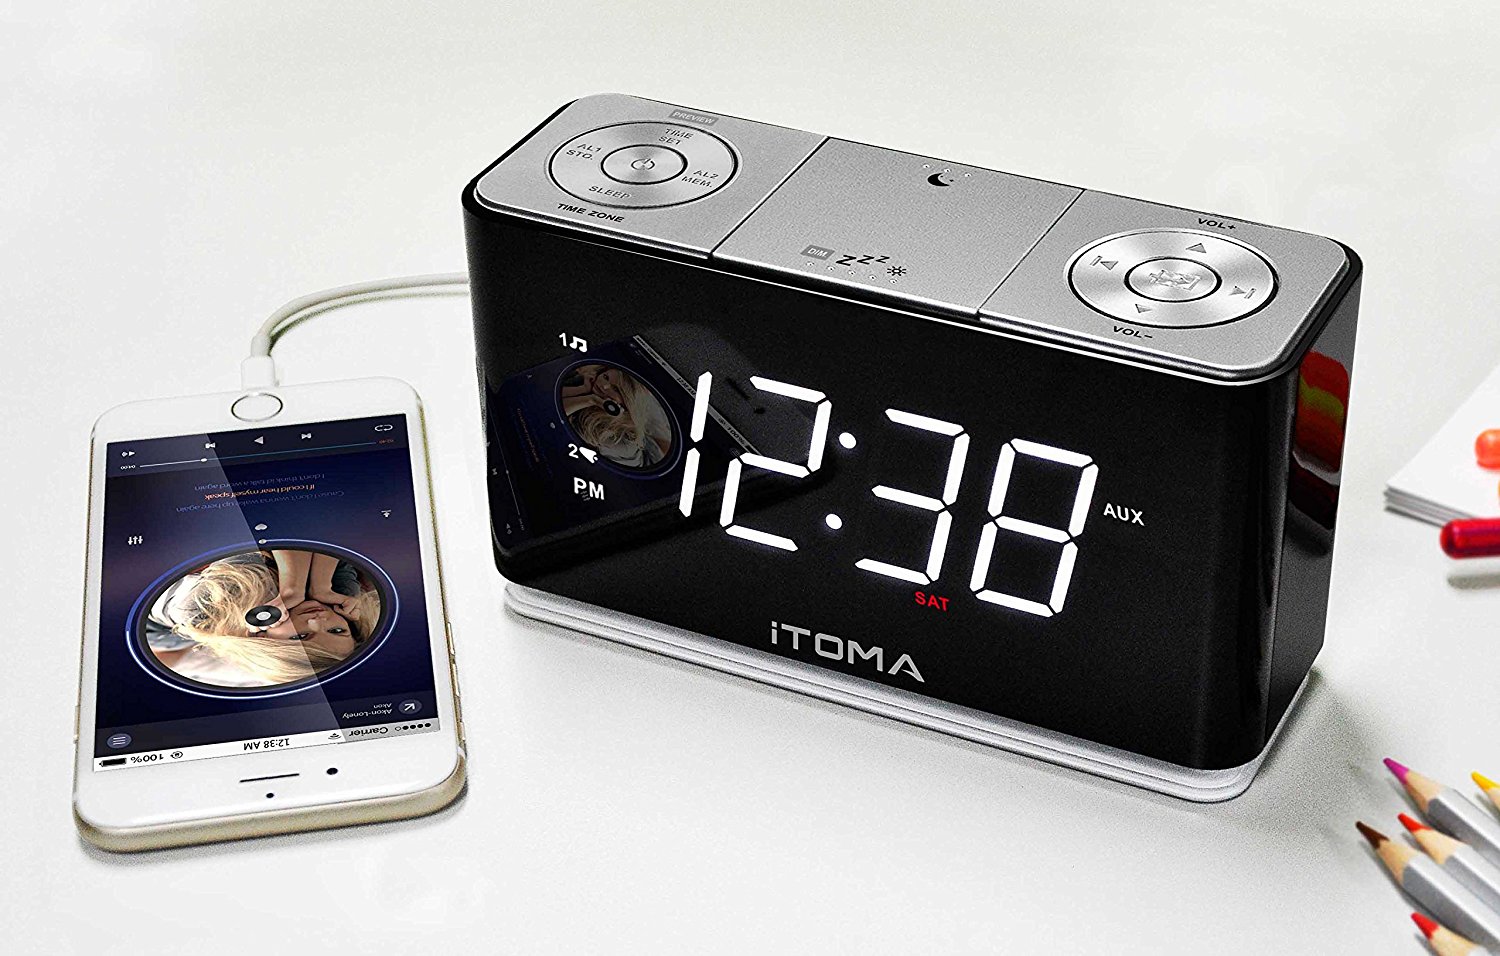 iTOMA Alarm Clock with FM Radio, Dual Alarm, USB Charging, Night Light, Auto Dimmer Control, Sleep Timer, Auto Time Setting, AUX-IN, Backup Battery (CKS507)